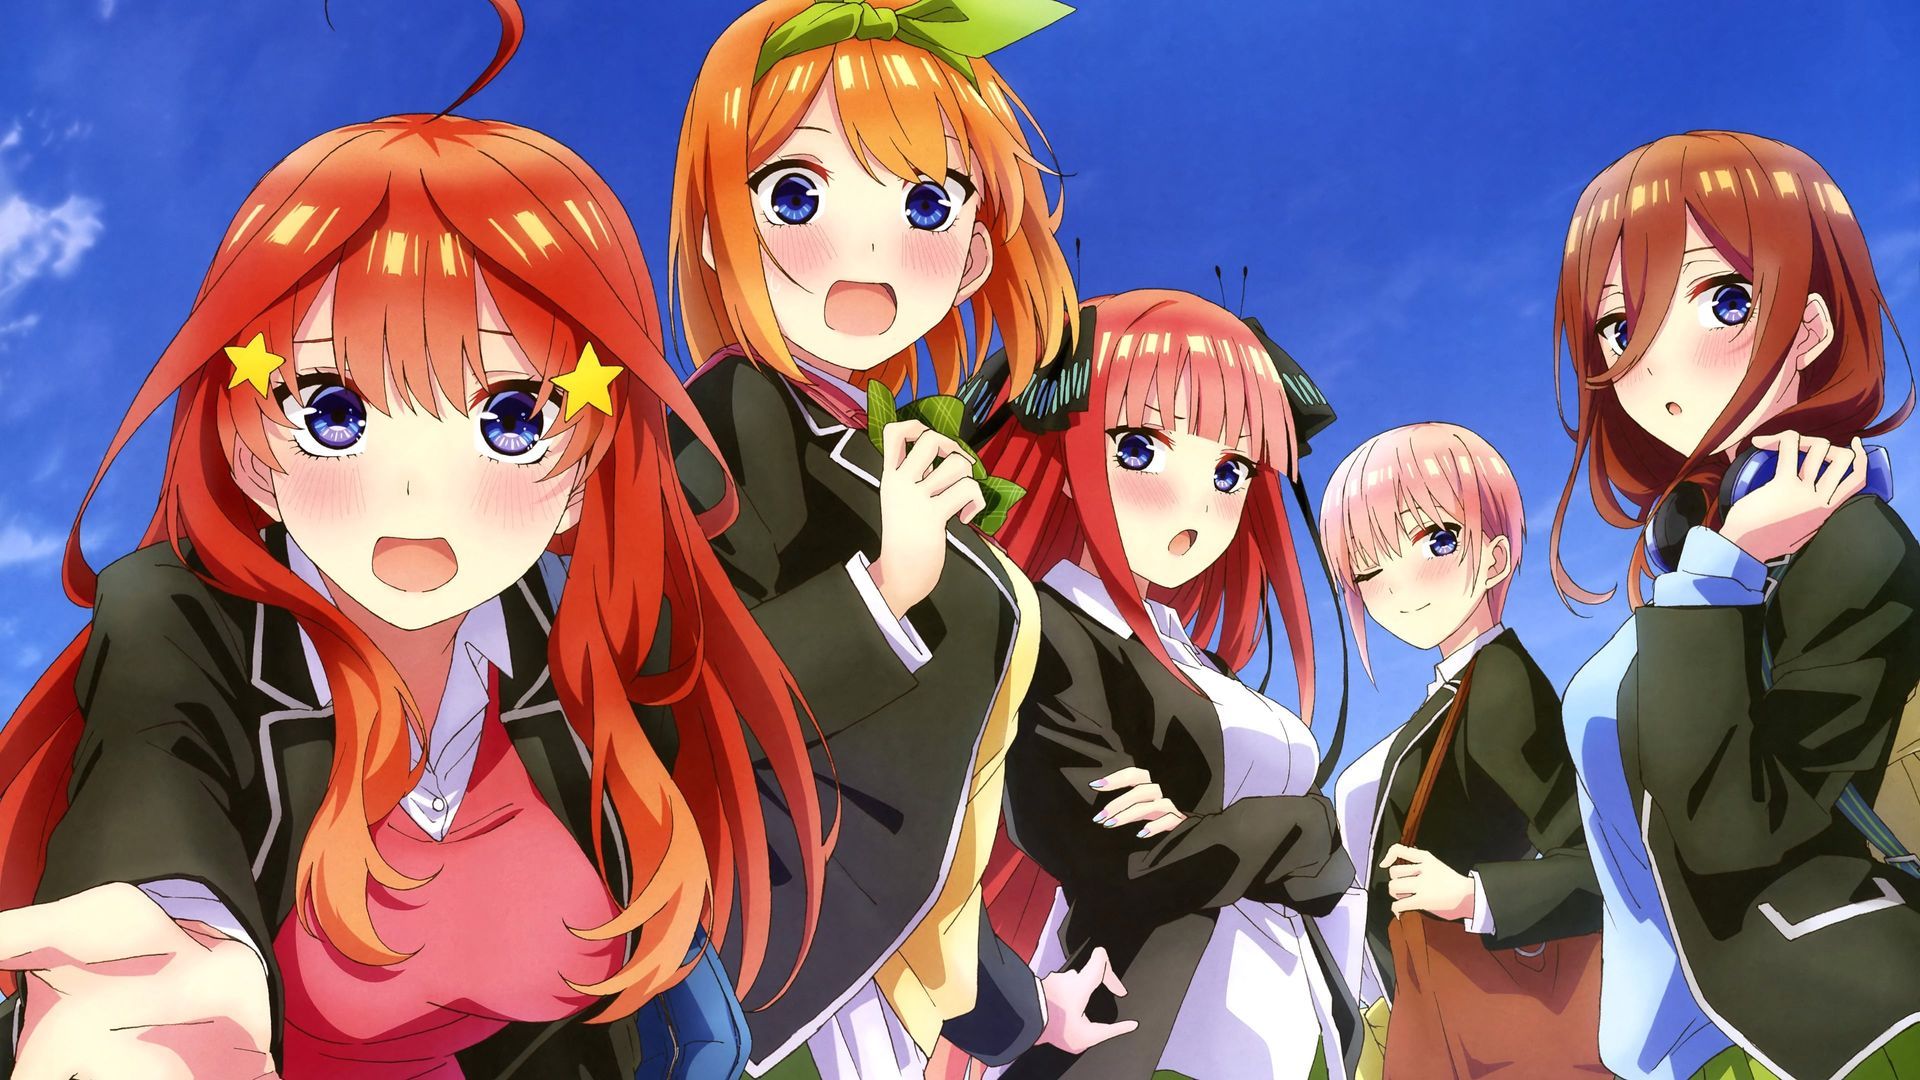 Watch The Quintessential Quintuplets Episode 9 Online - Legend of Fate Day 1